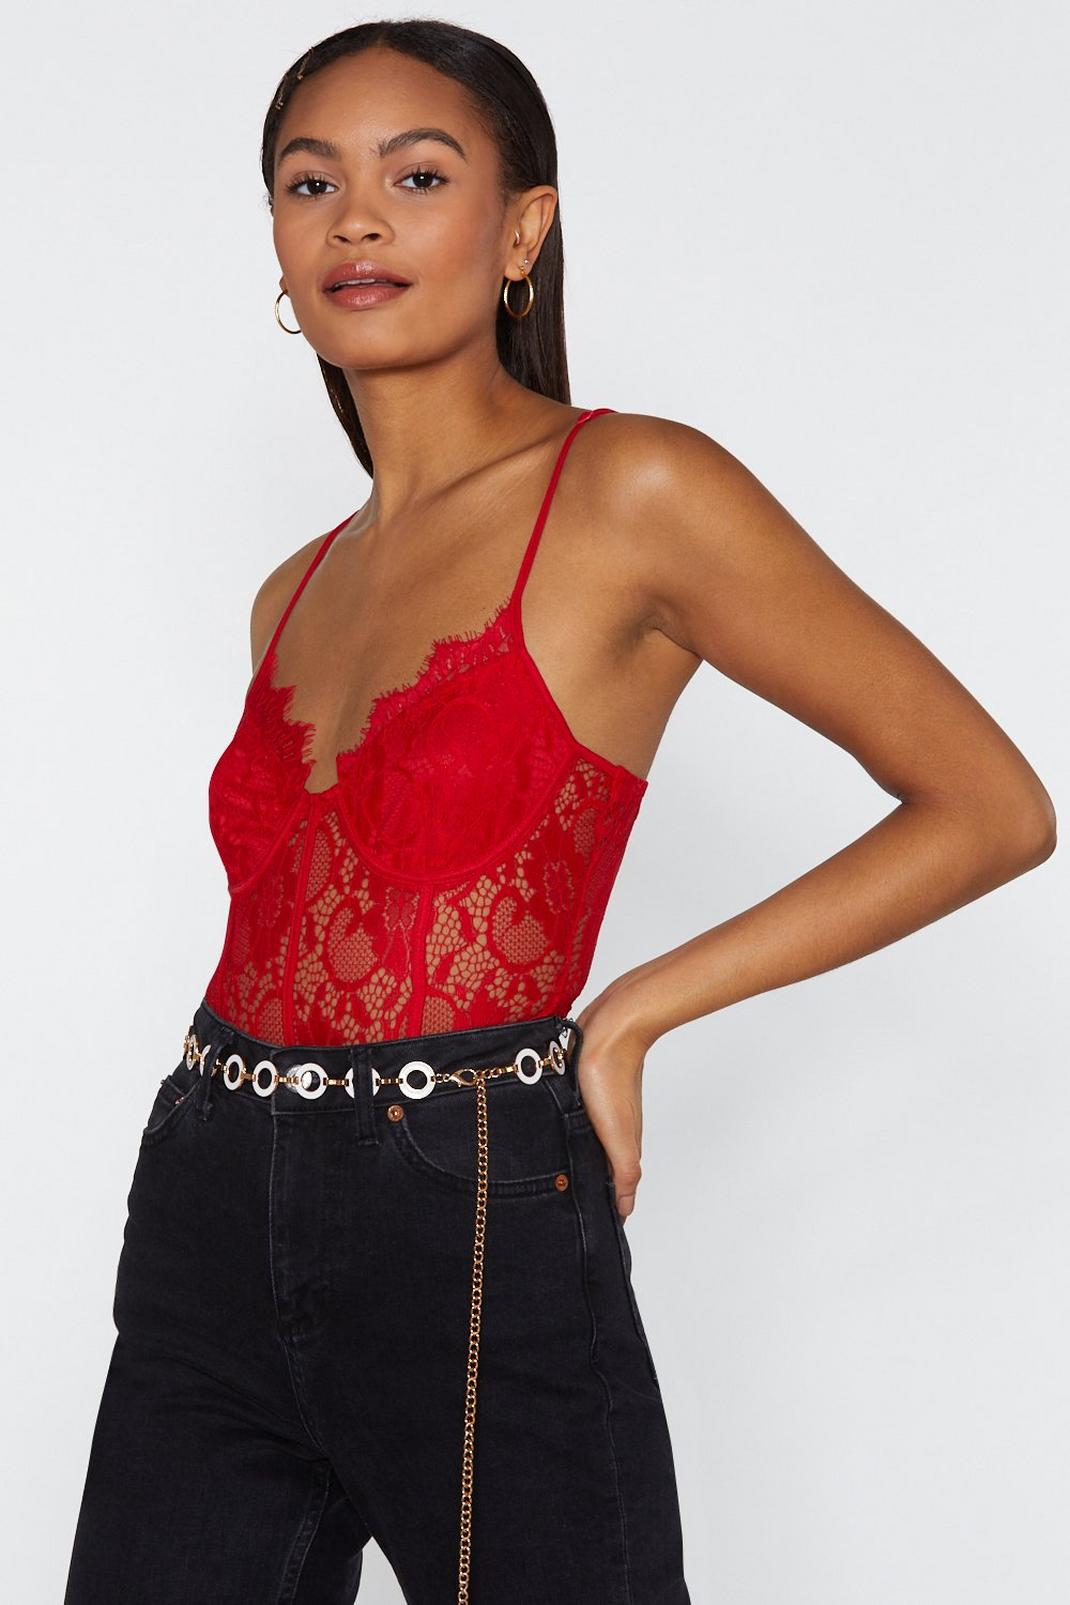 https://media.nastygal.com/i/nastygal/agg75825_red_xl/female-red-crazy-in-love-cupped-lace-bodysuit/?w=1070&qlt=default&fmt.jp2.qlt=70&fmt=auto&sm=fit